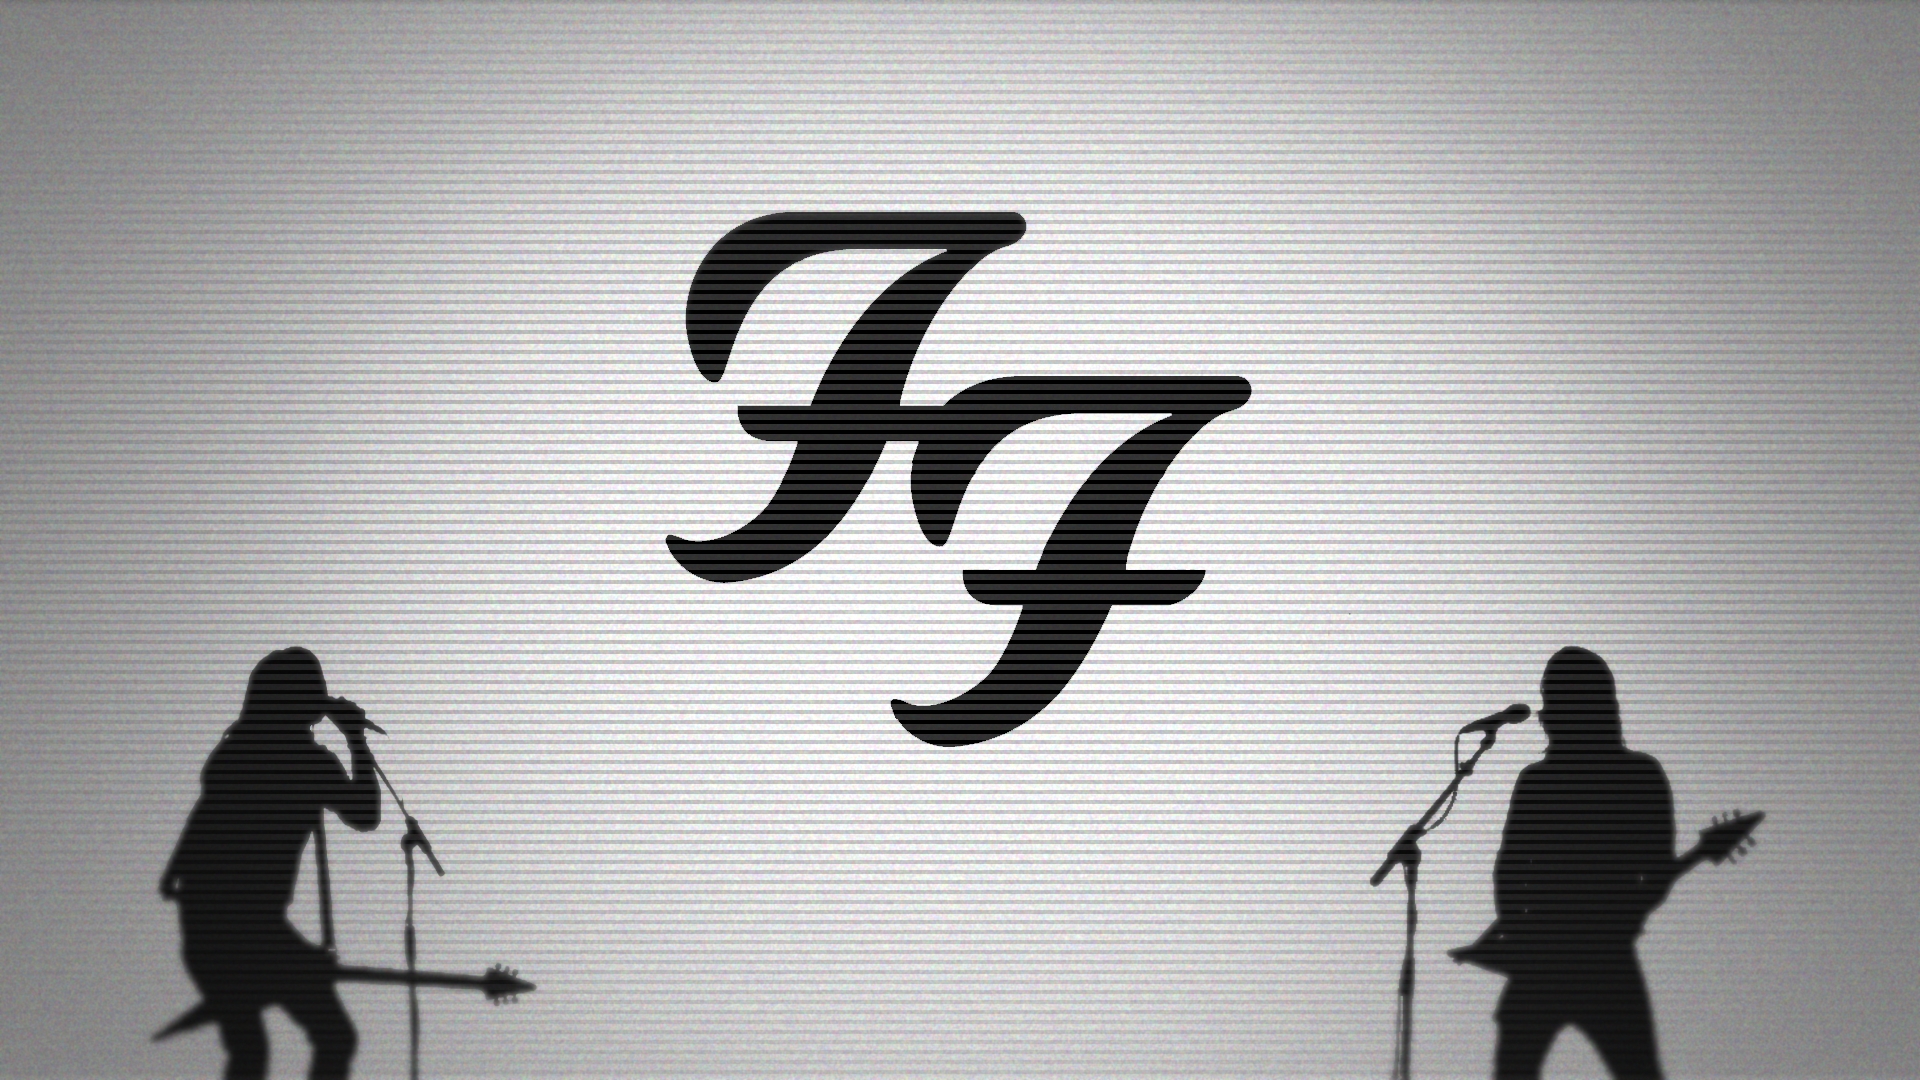 Foo fighters wallpaper progression made by me by milamio on